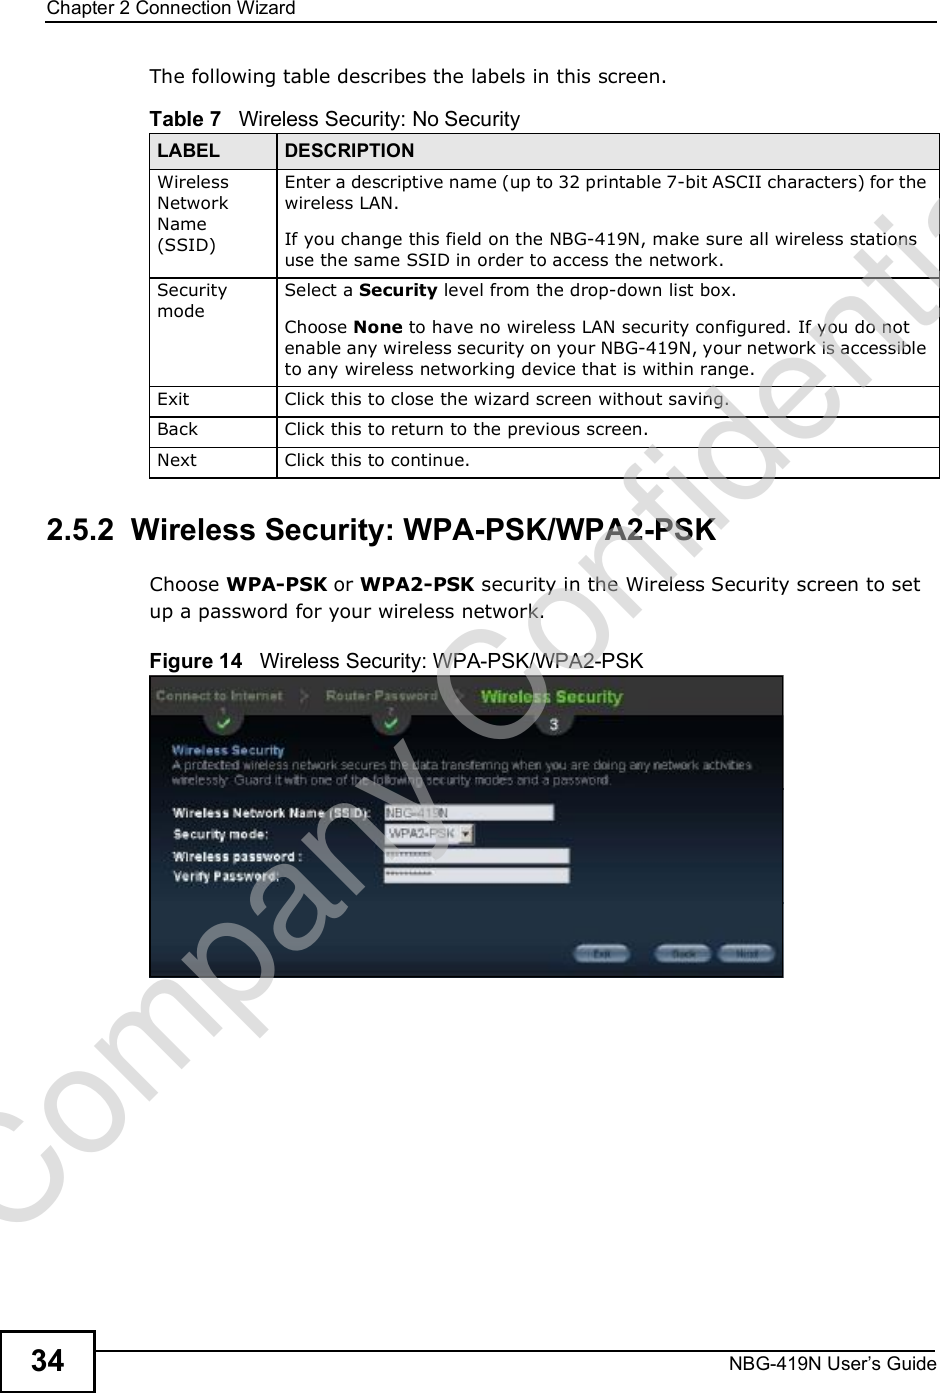 Chapter 2Connection WizardNBG-419N User s Guide34The following table describes the labels in this screen.2.5.2  Wireless Security: WPA-PSK/WPA2-PSKChoose WPA-PSK or WPA2-PSK security in the Wireless Security screen to set up a password for your wireless network.Figure 14   Wireless Security: WPA-PSK/WPA2-PSKTable 7   Wireless Security: No SecurityLABEL DESCRIPTIONWireless Network Name (SSID)Enter a descriptive name (up to 32 printable 7-bit ASCII characters) for the wireless LAN. If you change this field on the NBG-419N, make sure all wireless stations use the same SSID in order to access the network. Security modeSelect a Security level from the drop-down list box. Choose None to have no wireless LAN security configured. If you do not enable any wireless security on your NBG-419N, your network is accessible to any wireless networking device that is within range. Exit Click this to close the wizard screen without saving.Back Click this to return to the previous screen.Next Click this to continue. Company Confidential